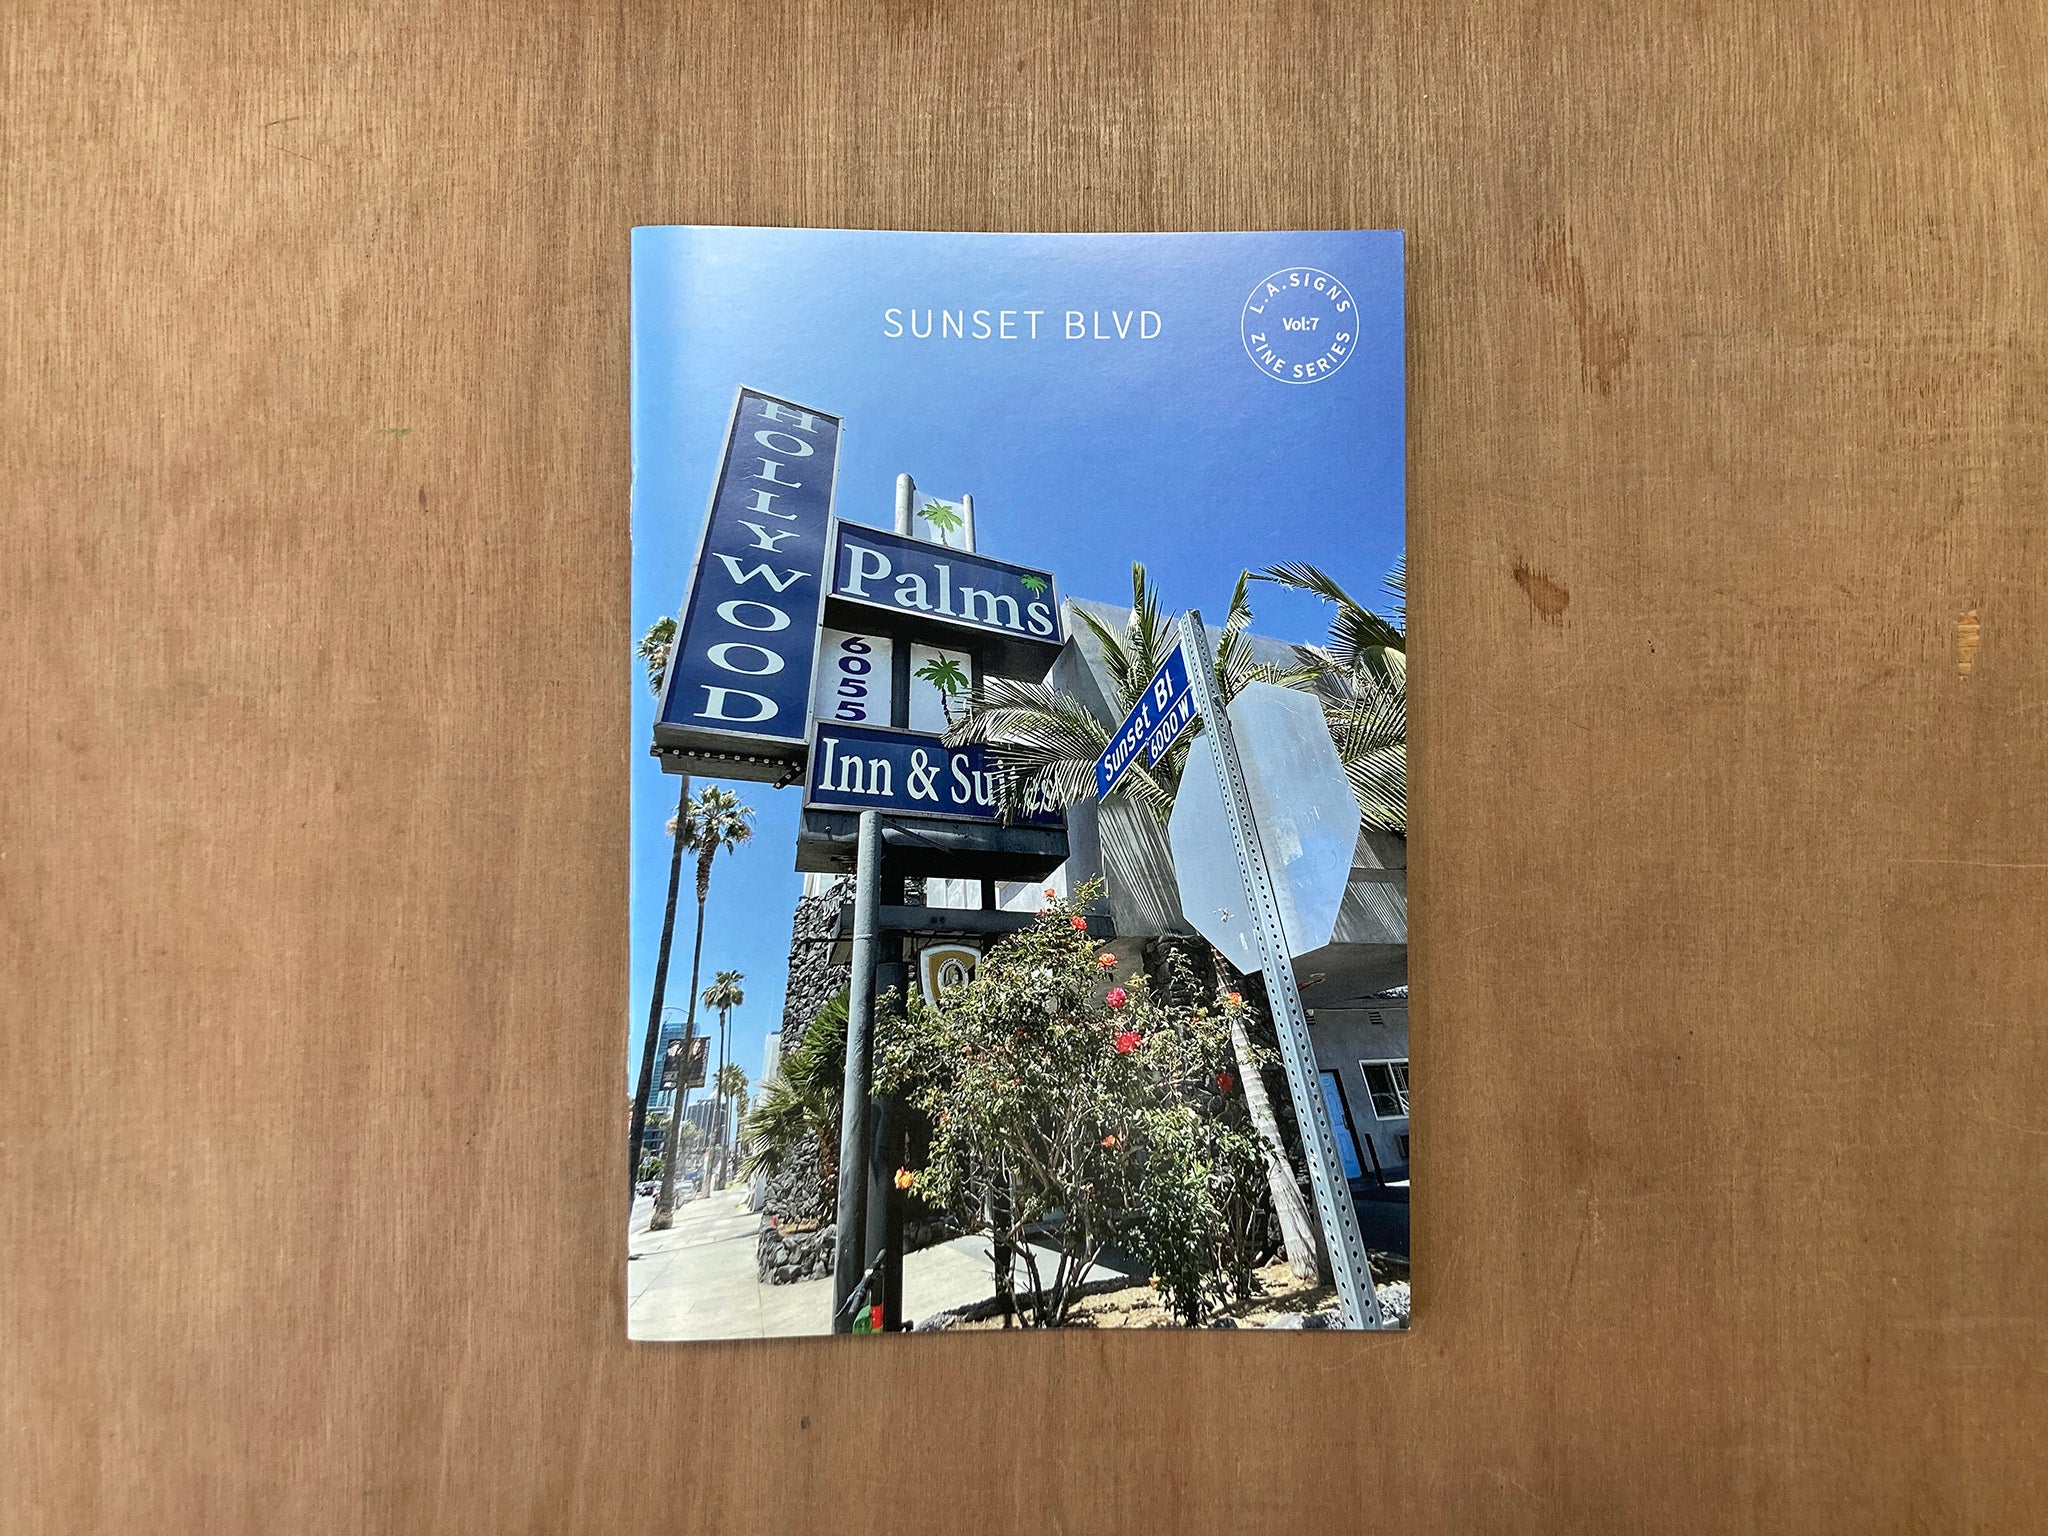 L.A. SIGNS ZINE SERIES: SUNSET BLVD by Paul Price